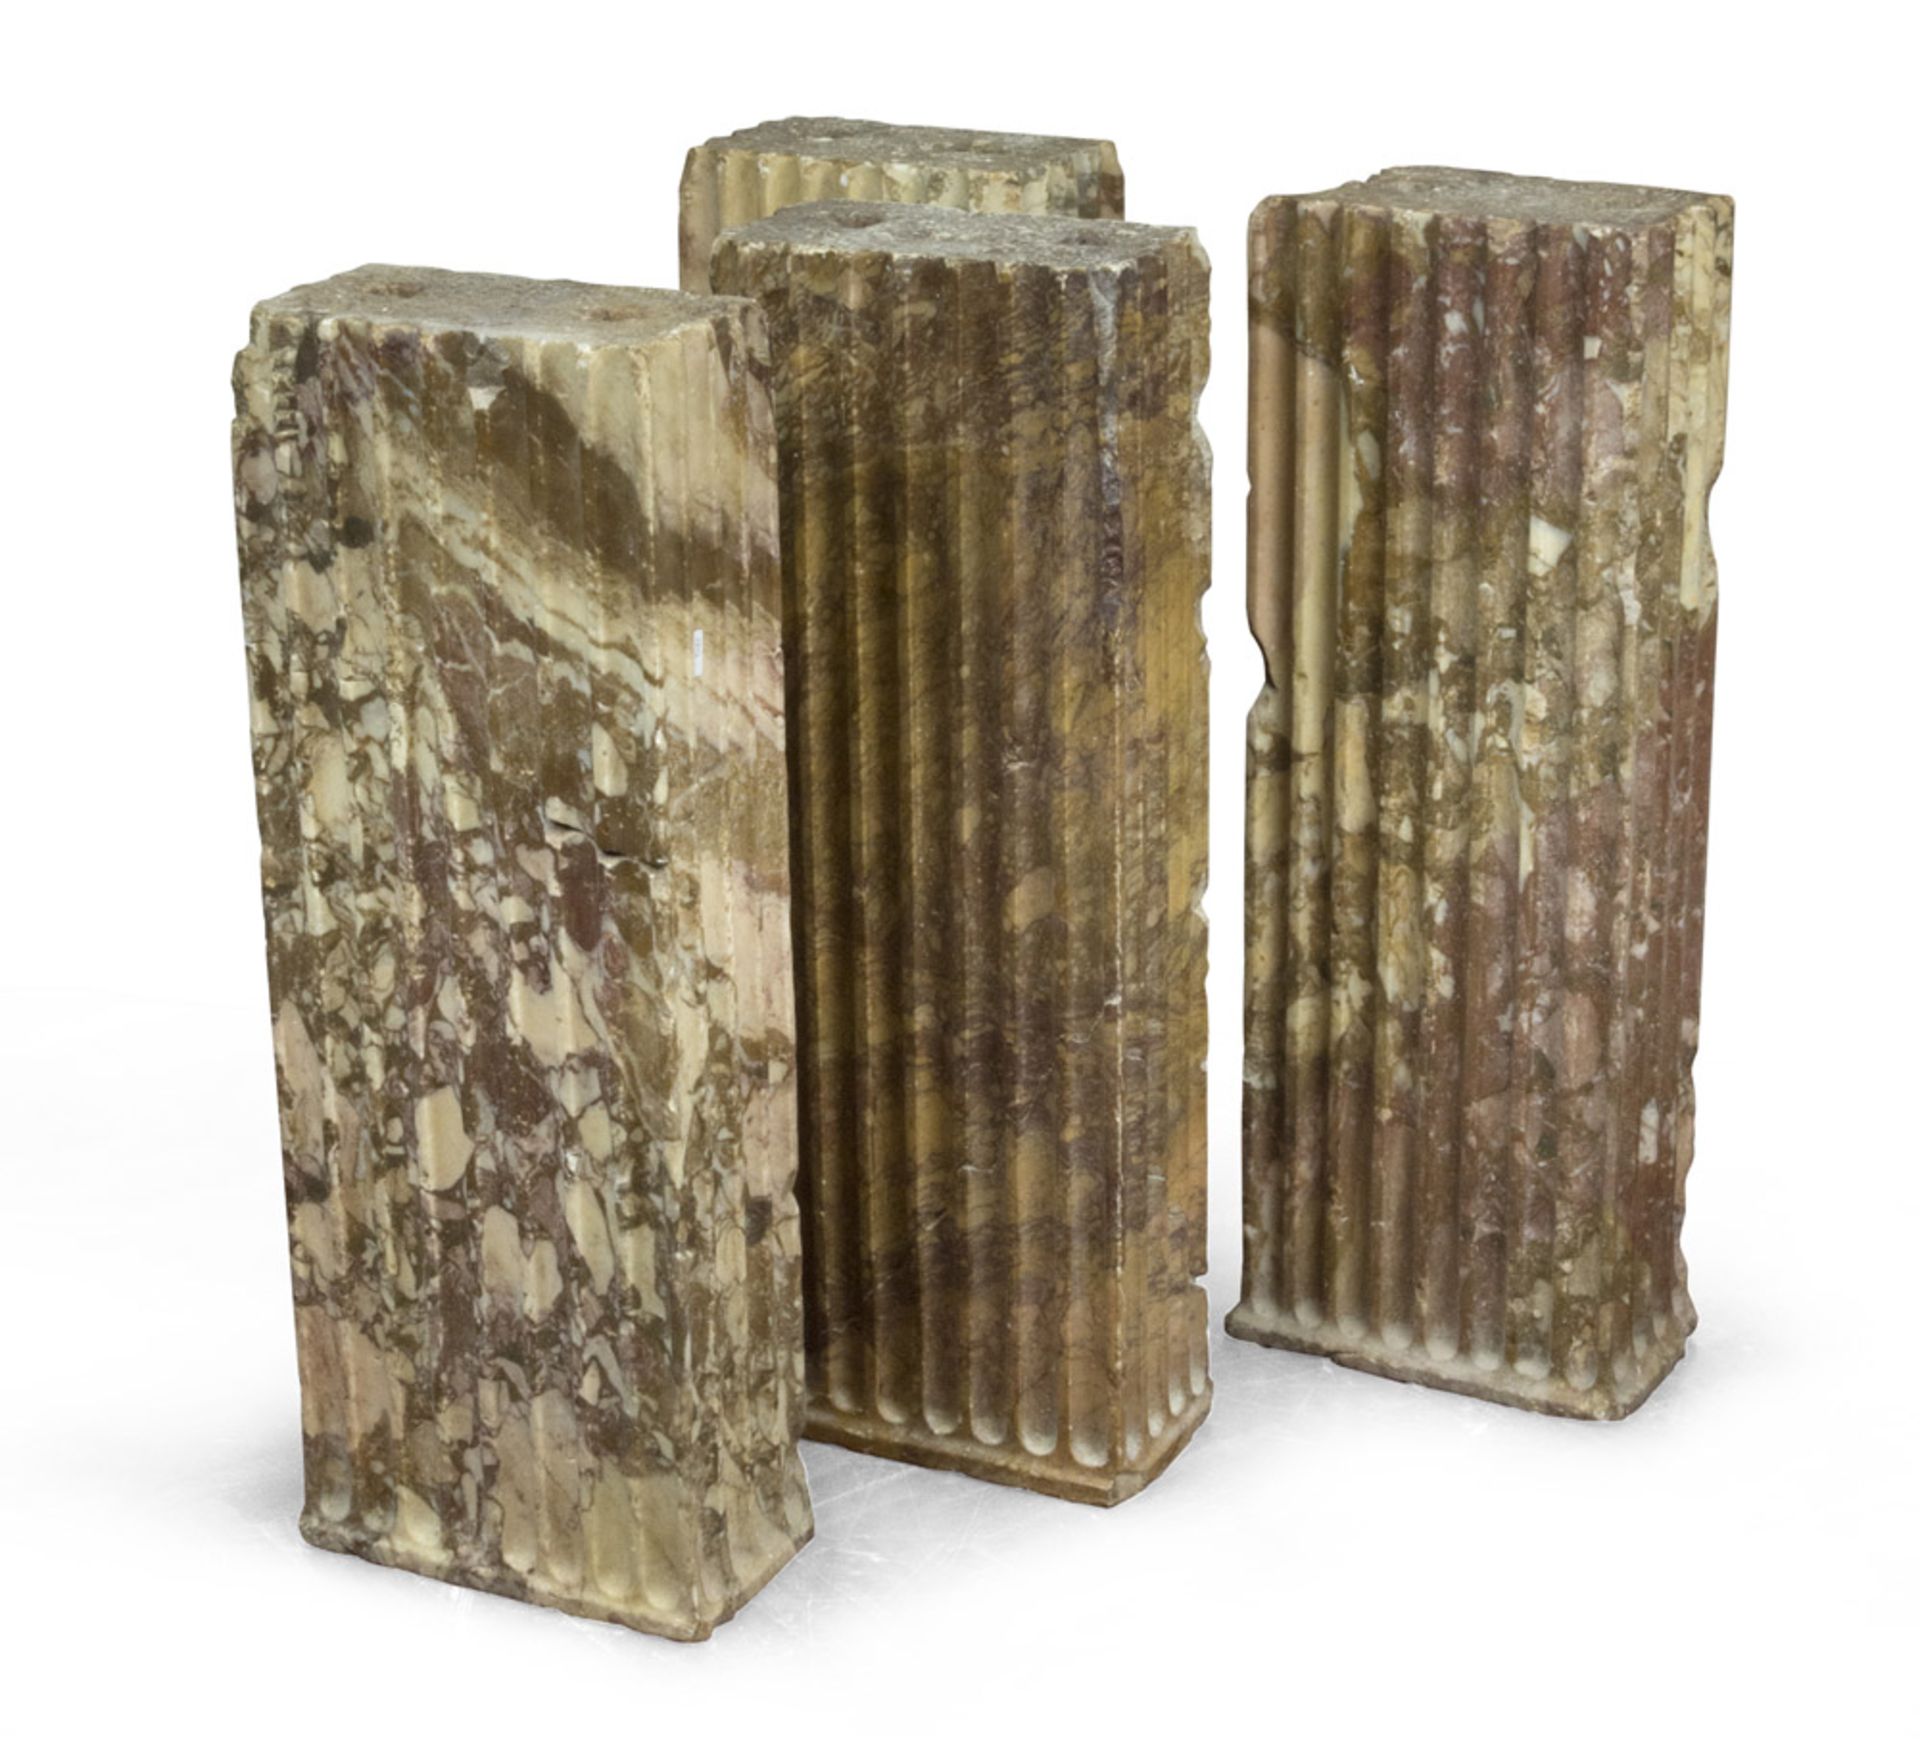 FOUR PILLARS IN ANCIENT YELLOW MARBLE, 18TH CENTURY of rectangular section. Measures cm. 81 x 28 X